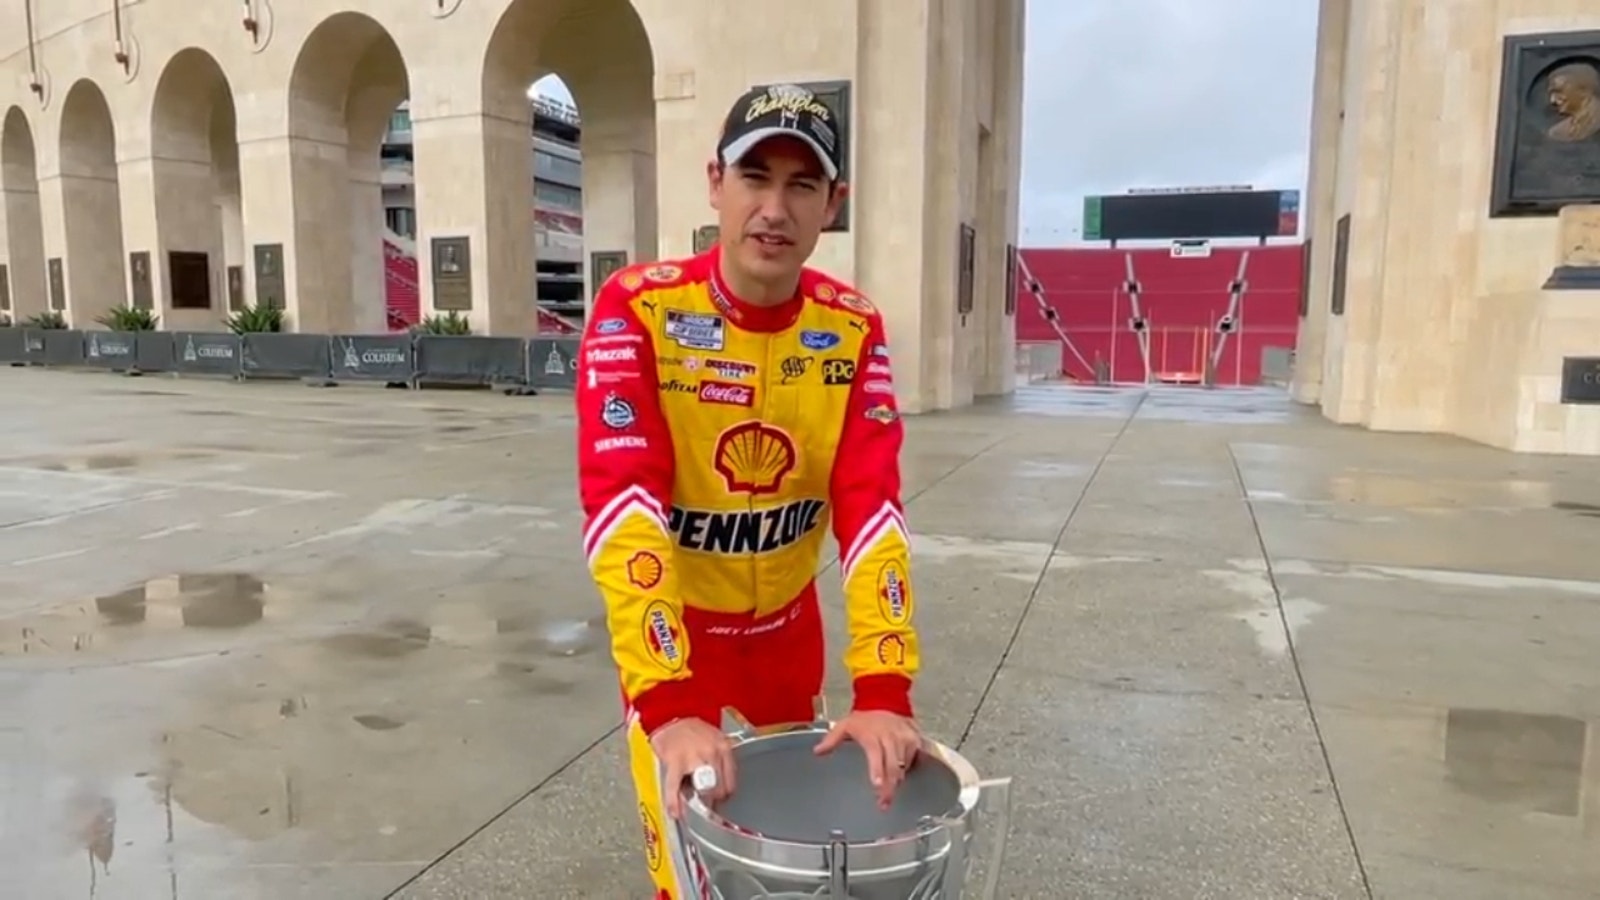 On whether Joey Logano deserves the Hall of Fame